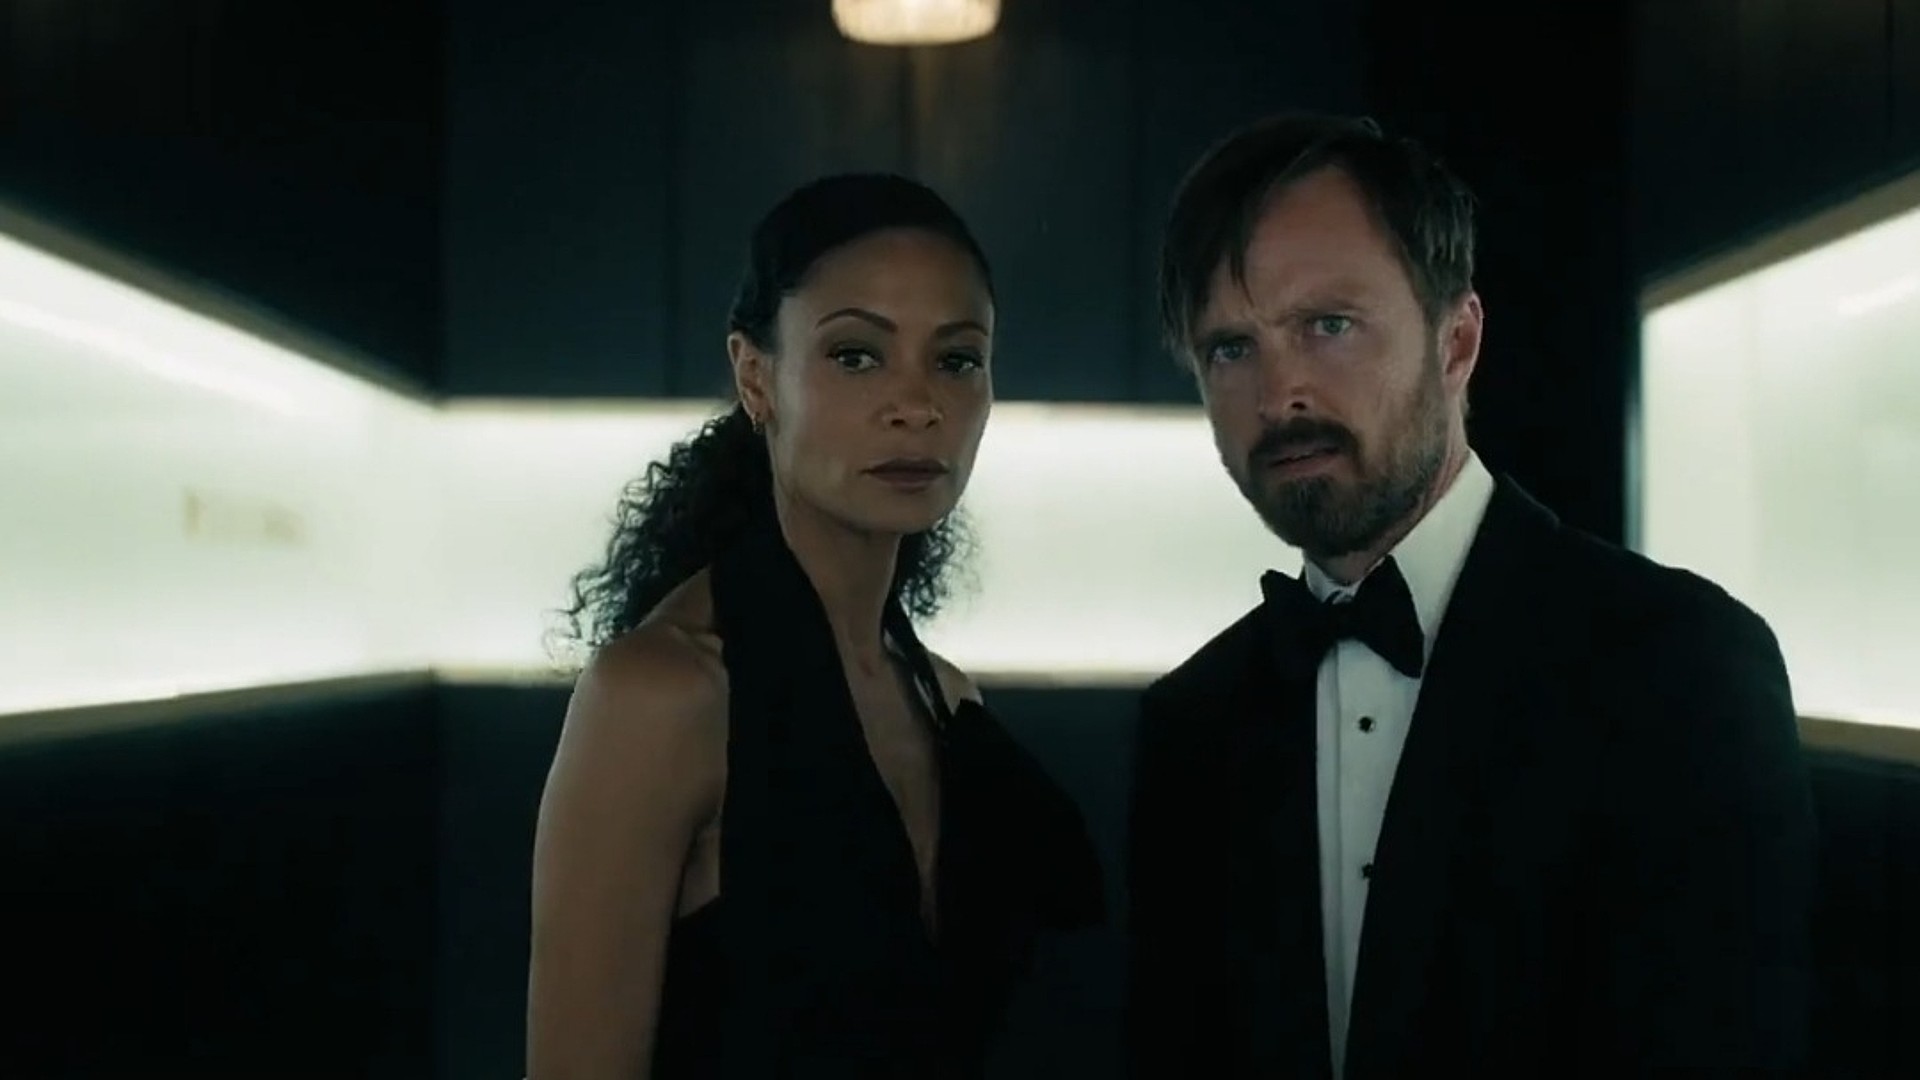 Westworld season 4 confirms release date with atmospheric, action-packed first teaser